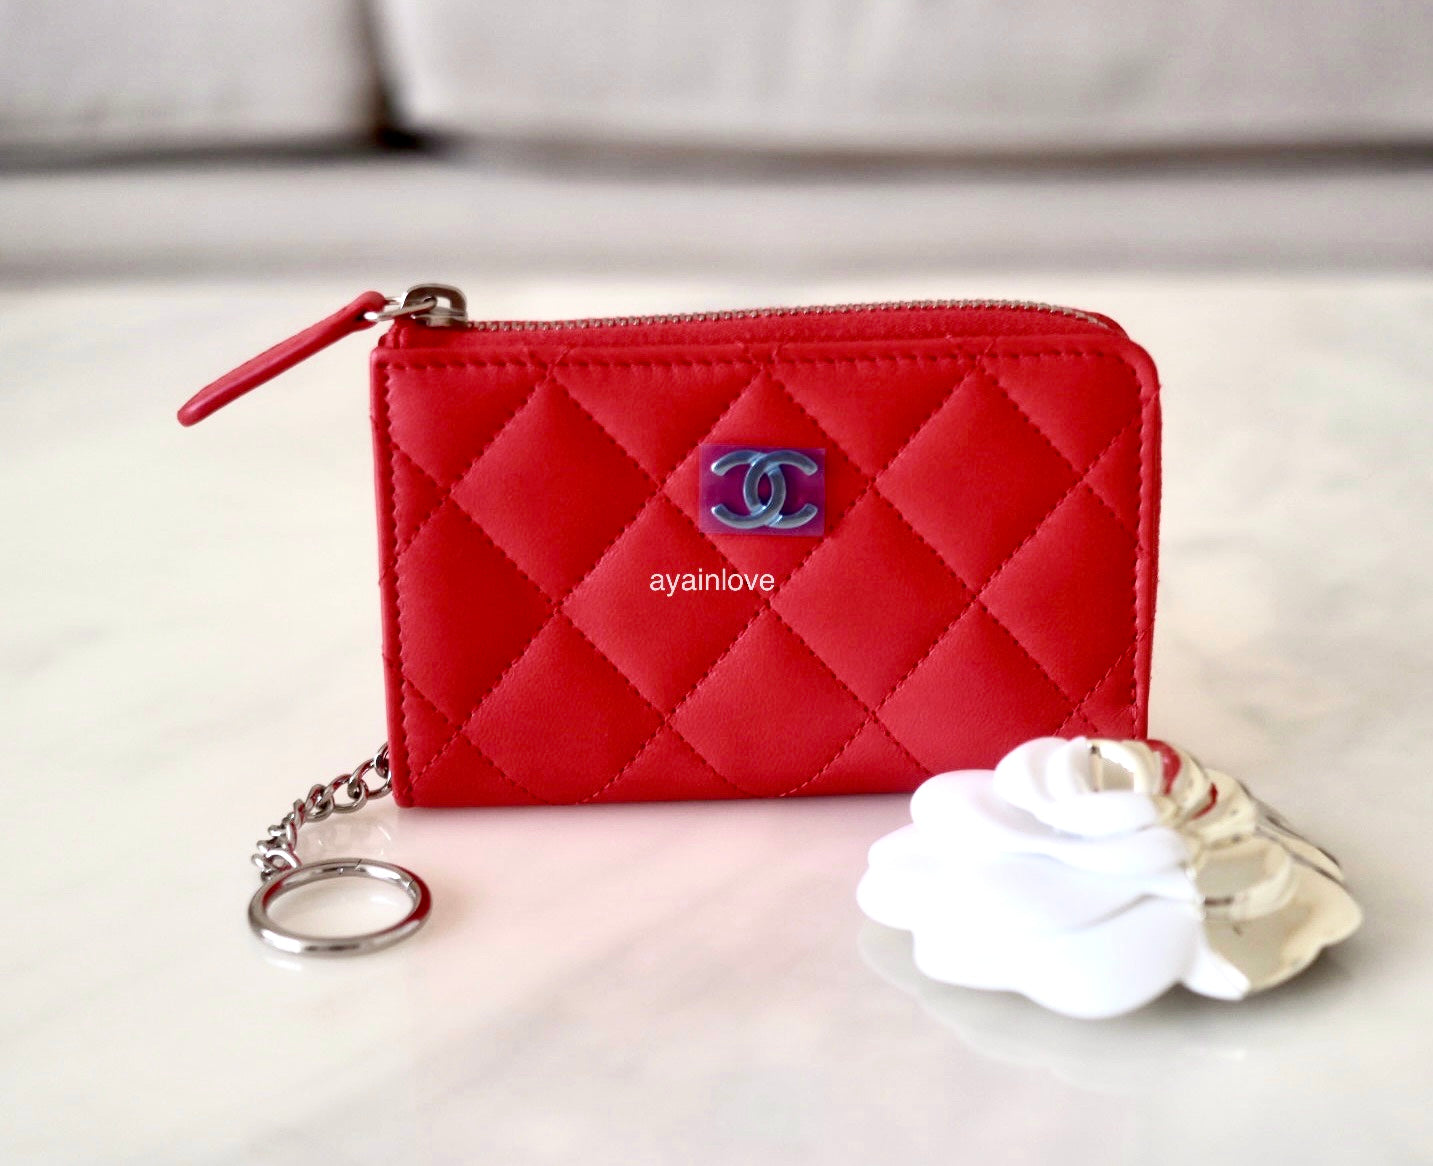 CHANEL 16S Red Lamb Skin Key Chain Zip Card Holder Silver Hardware